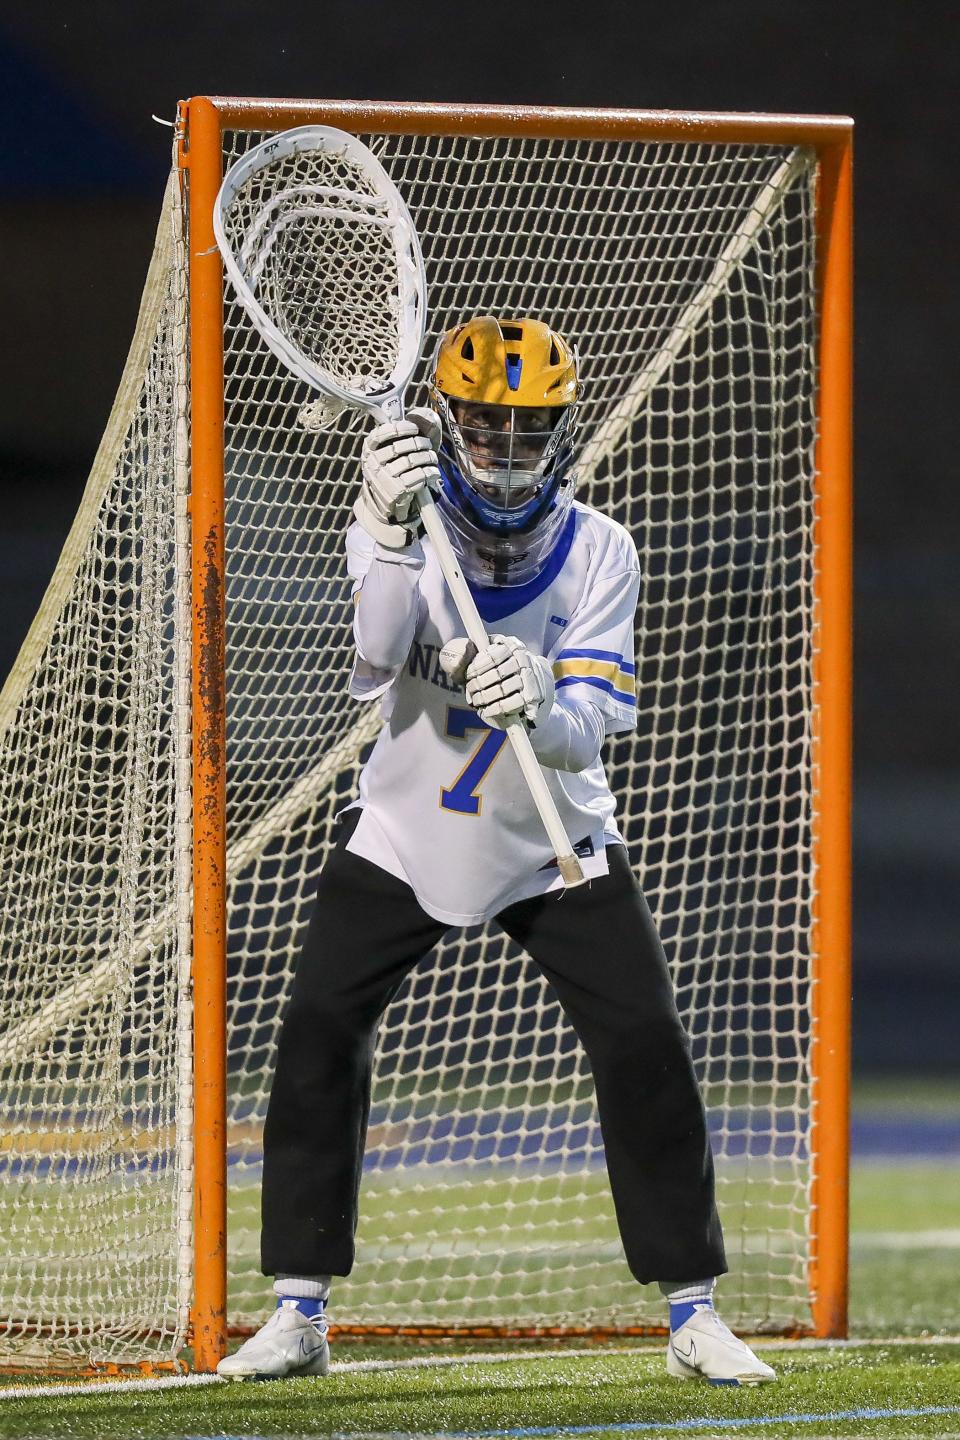 Mariemont goalie Luke Brennaman allowed just one goal in the second half of Monday's 9-5 win over Bellbrook in the Division II regional semifinals.